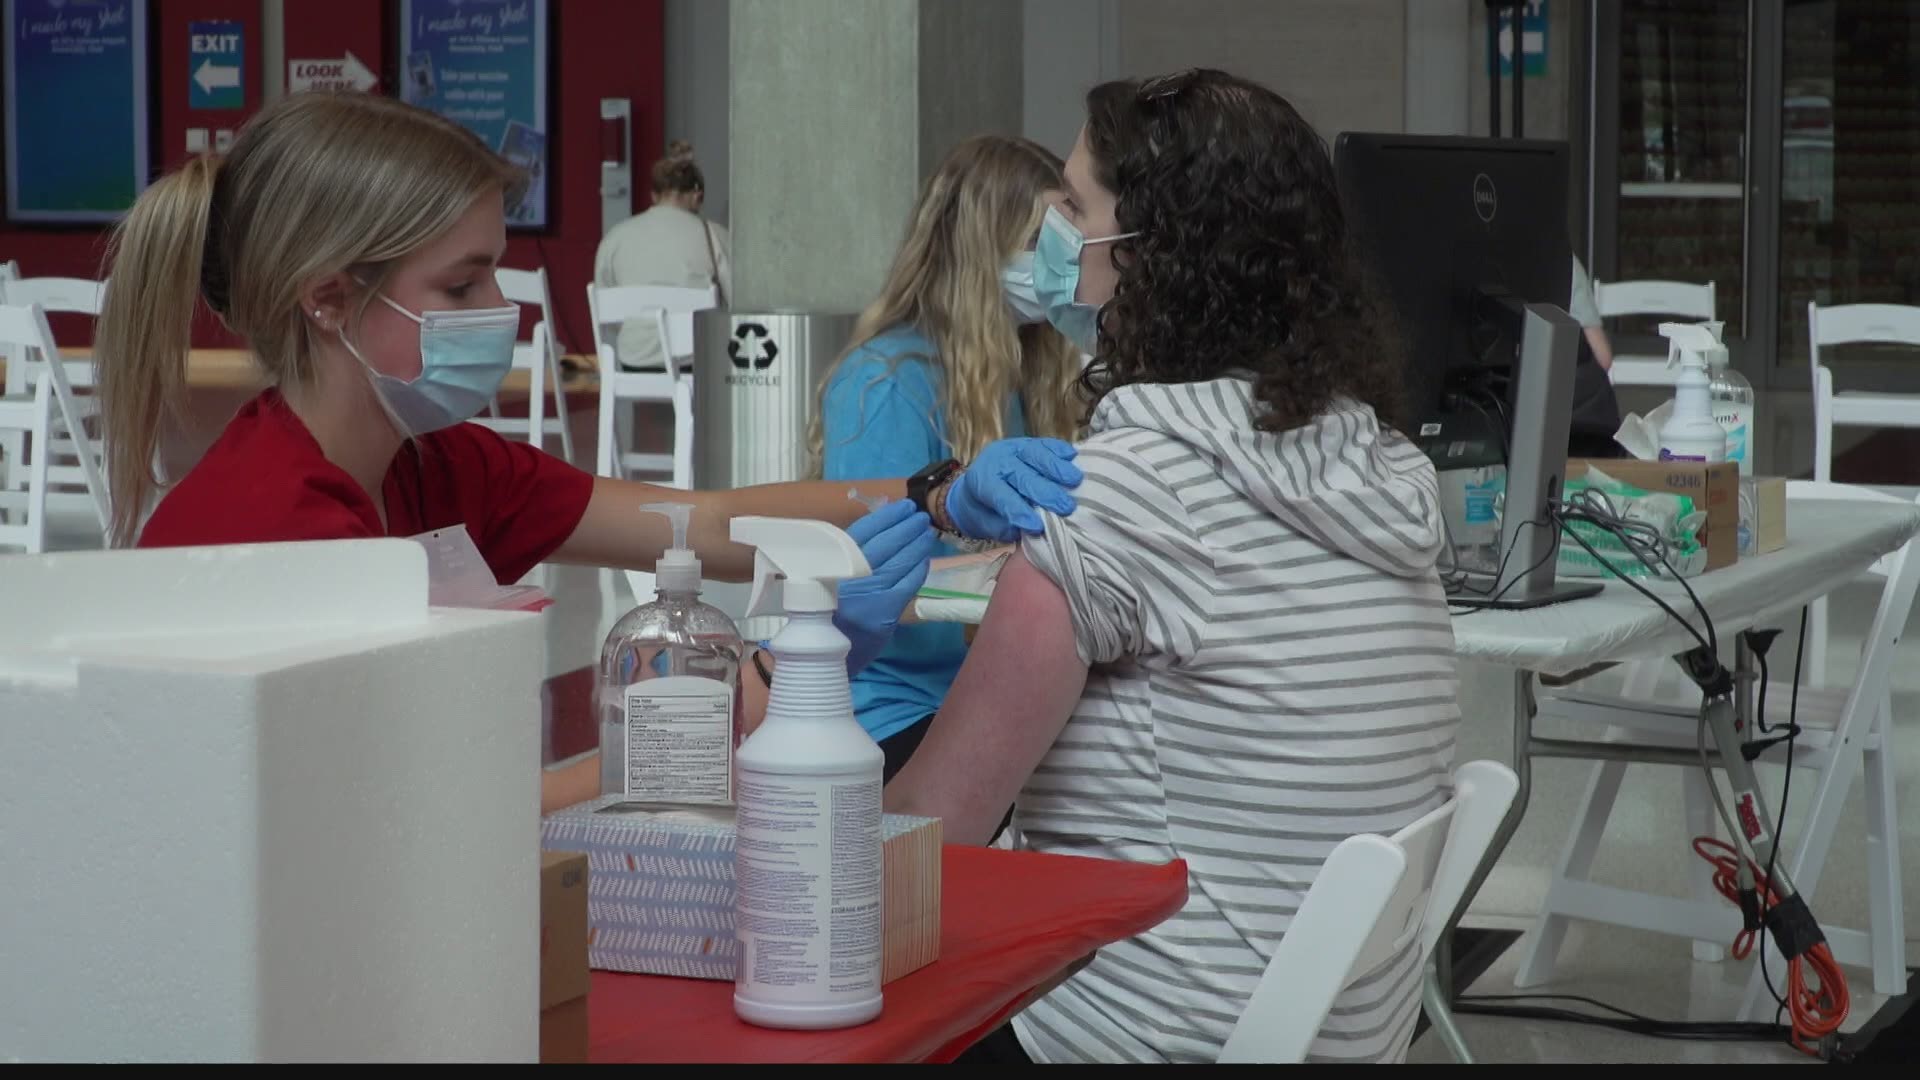 So far, six college campuses across the state are planning to vaccinate students starting next week.